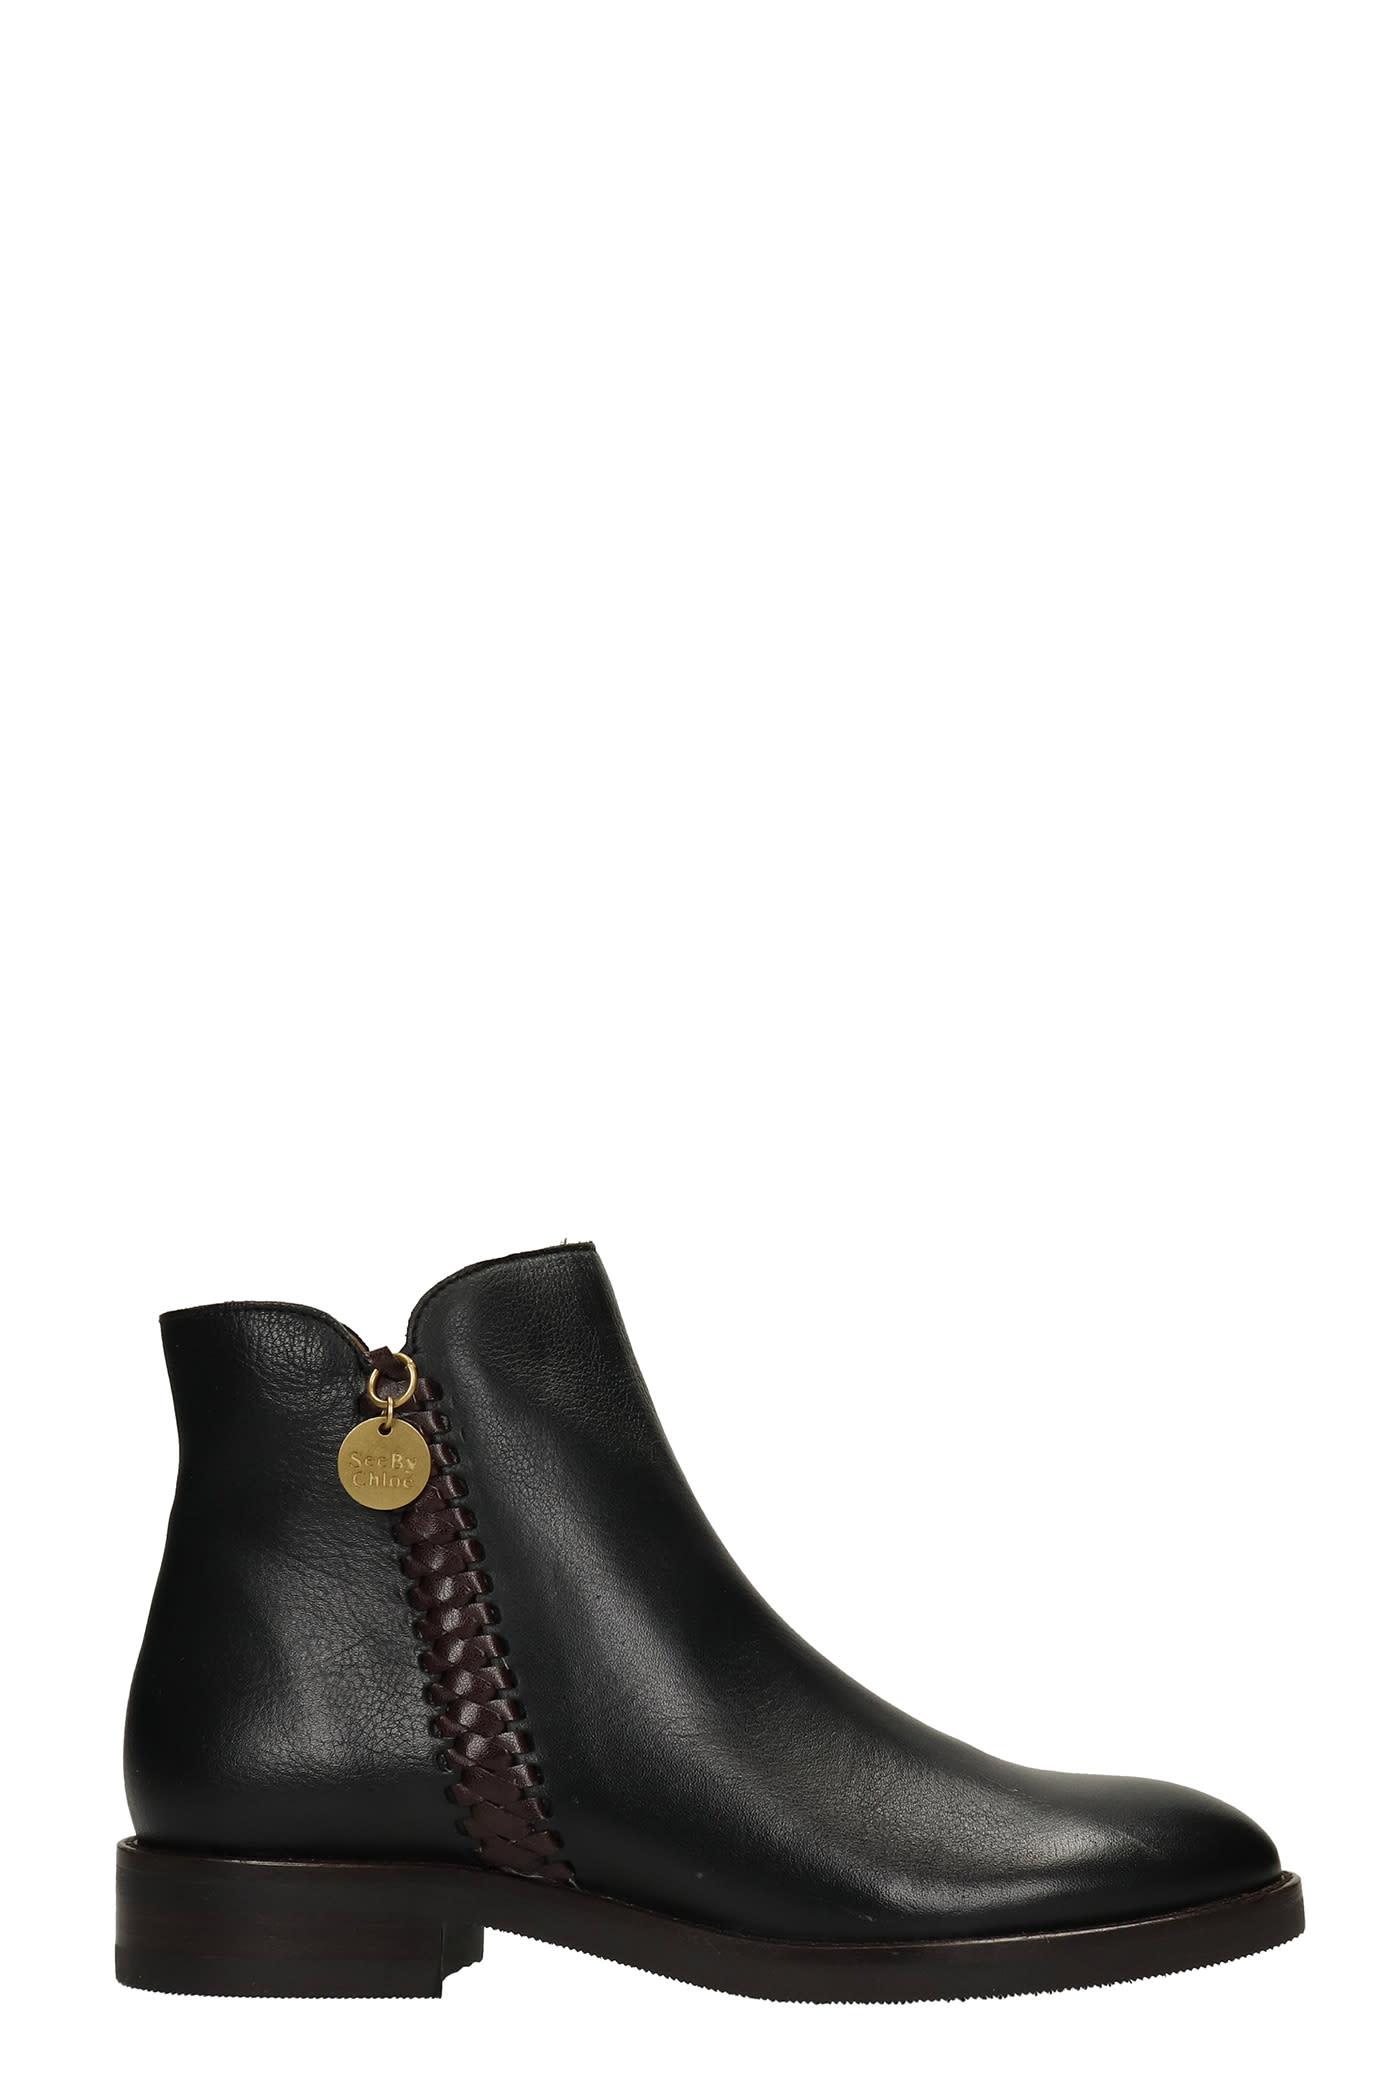 See by Chloé Louise Low Heels Ankle Boots In Black Leather